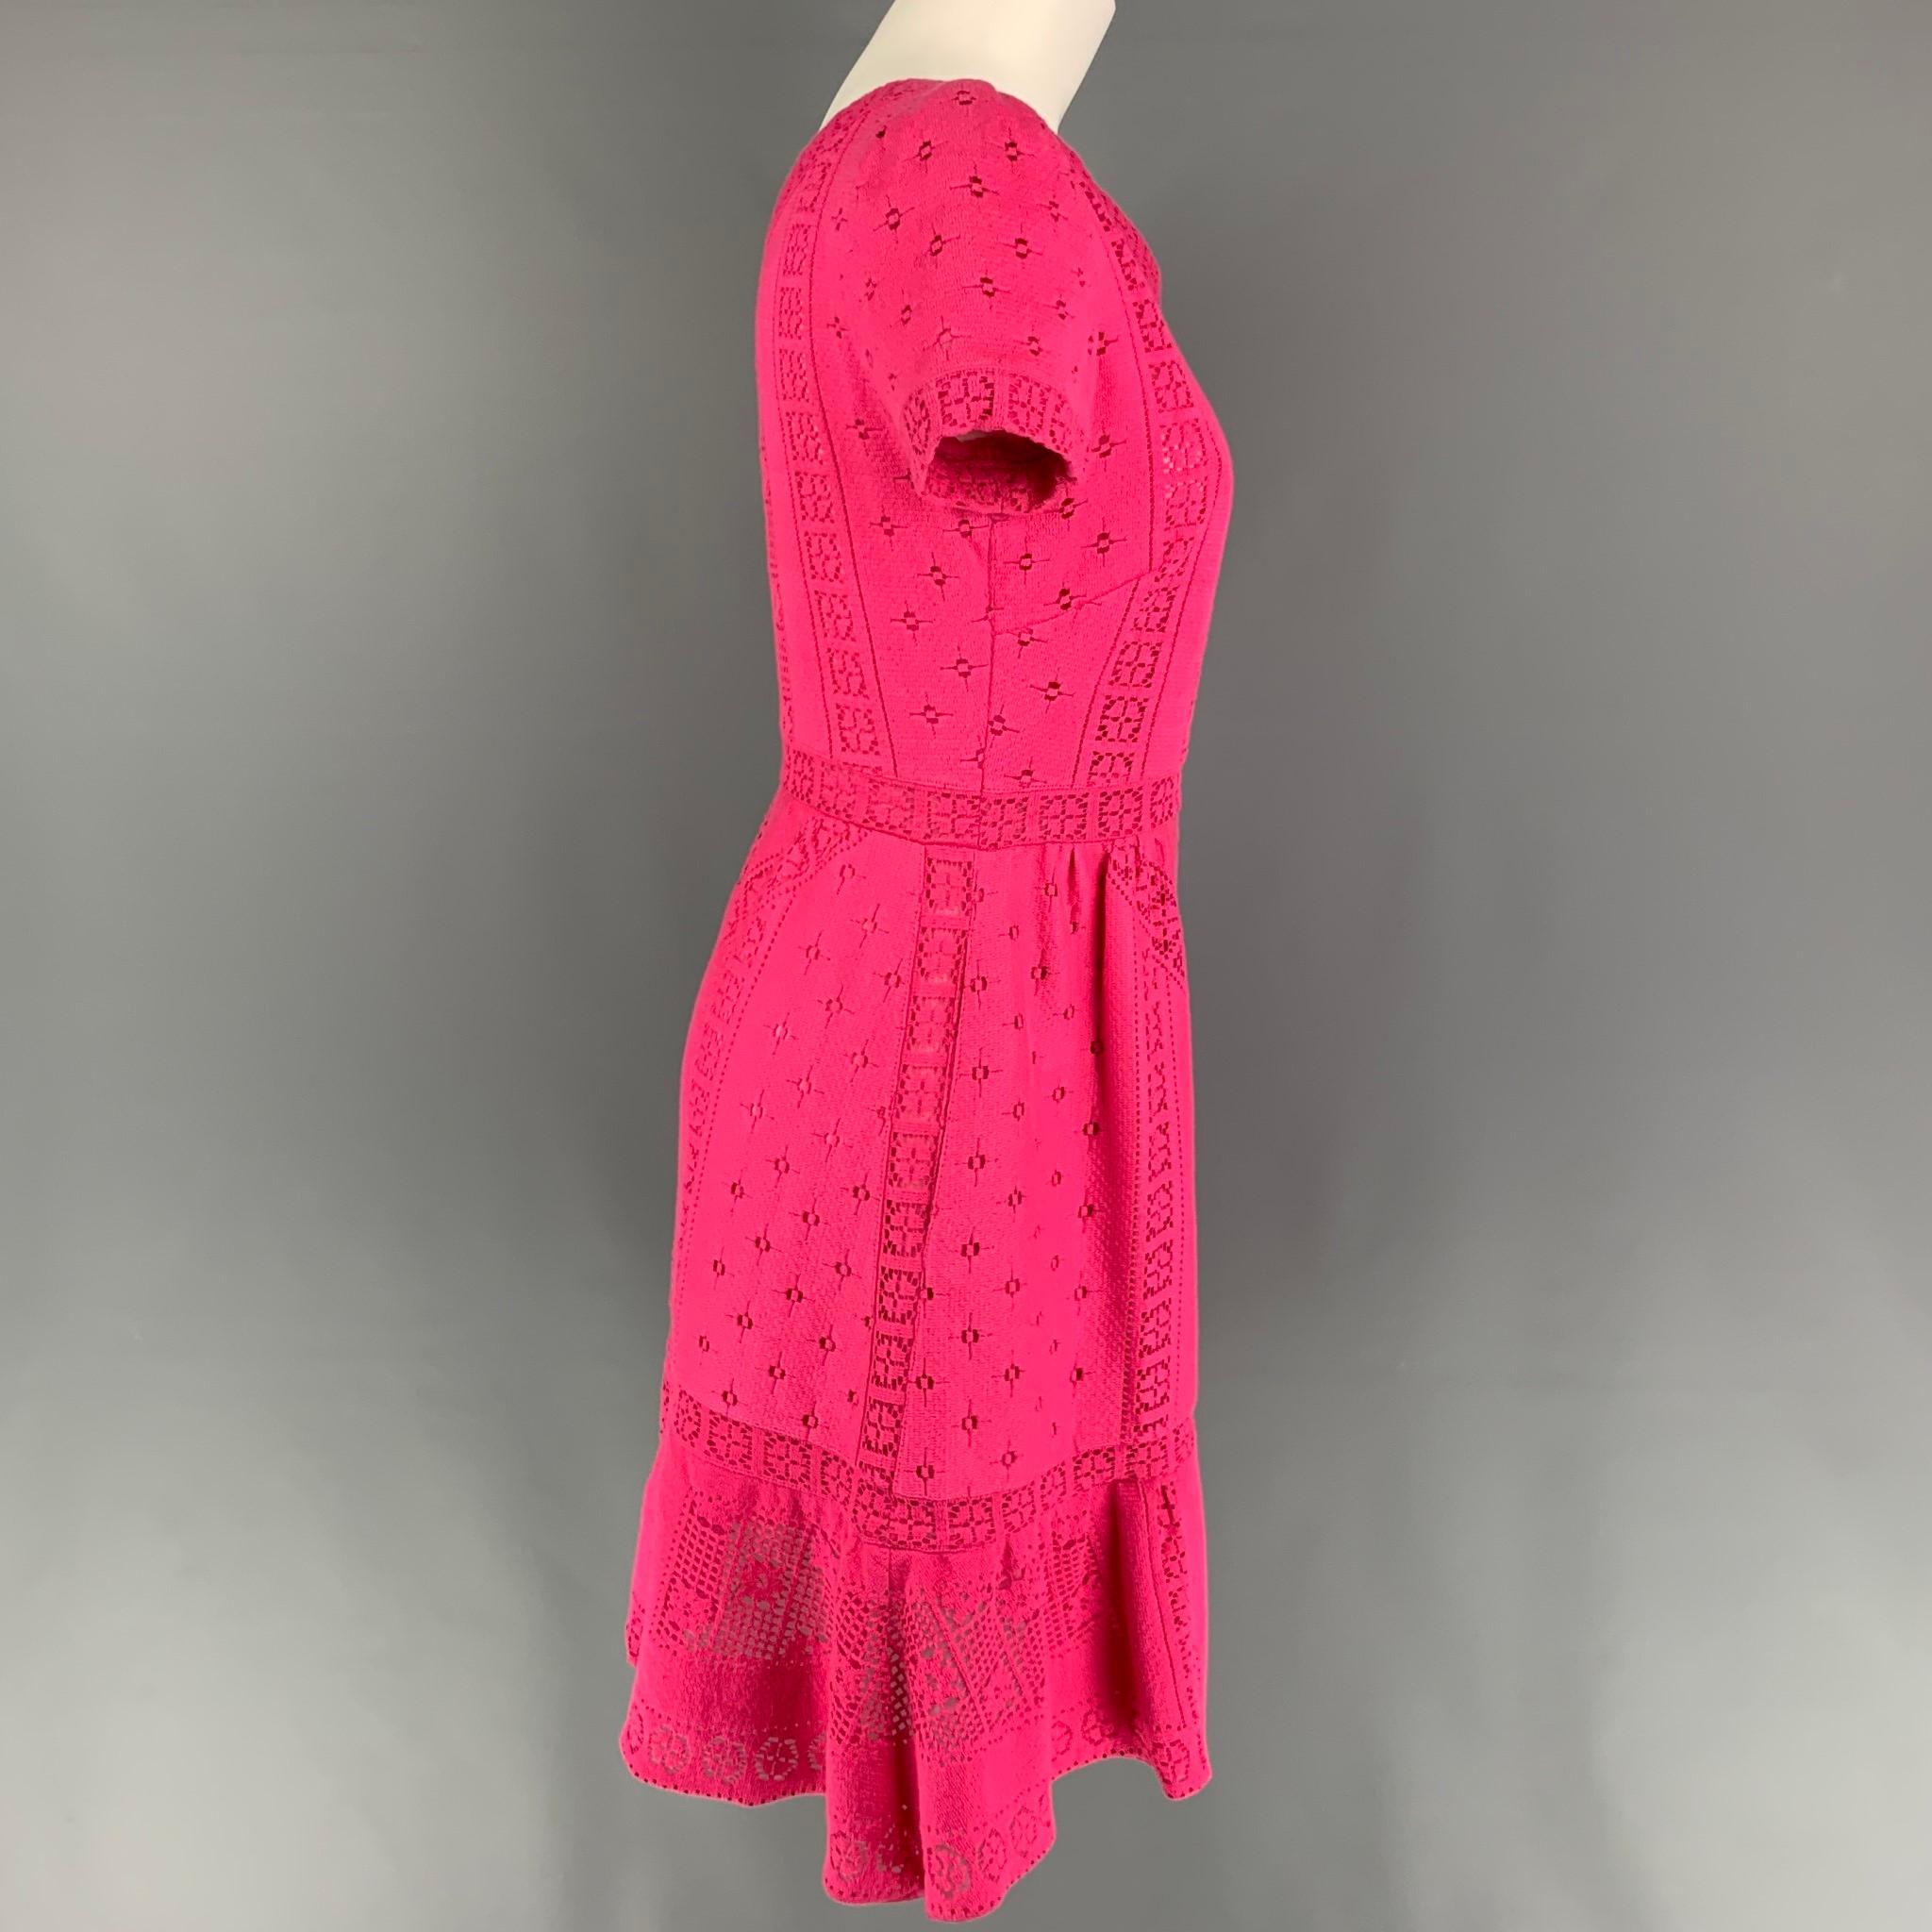 VALENTINO dress comes in a pink lace cotton / nylon with a slip liner featuring an a-line style, short sleeves, slit pockets, v-neck, and a side zipper closure. Made in Italy. 

Very Good Pre-Owned Condition. Fabric tag removed.
Marked: